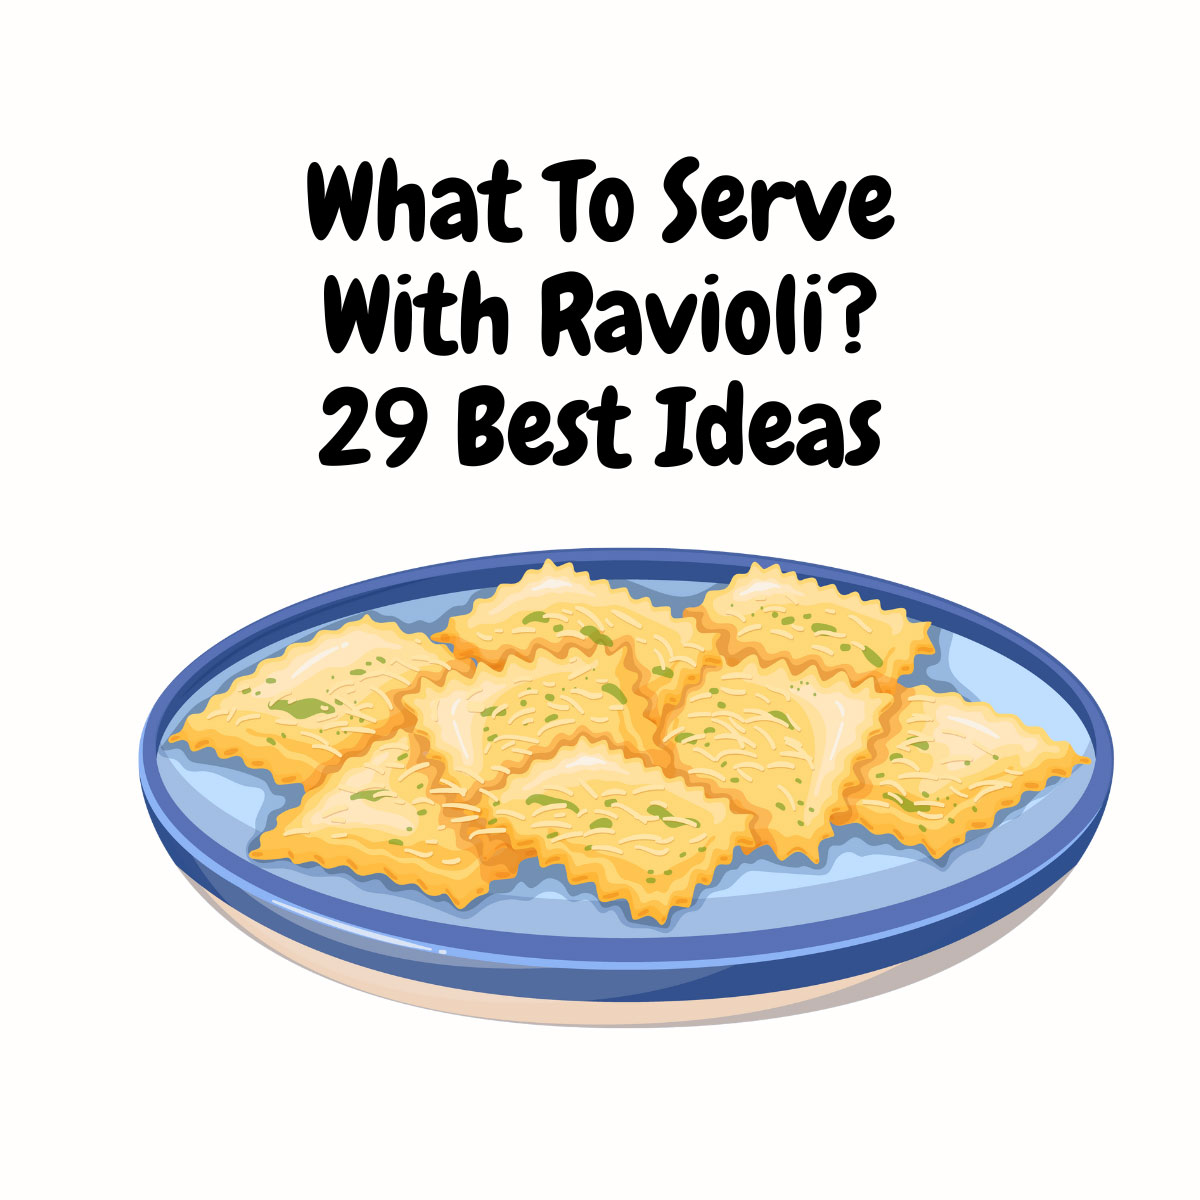 What To Serve With Ravioli featured image | Girl Meets Food